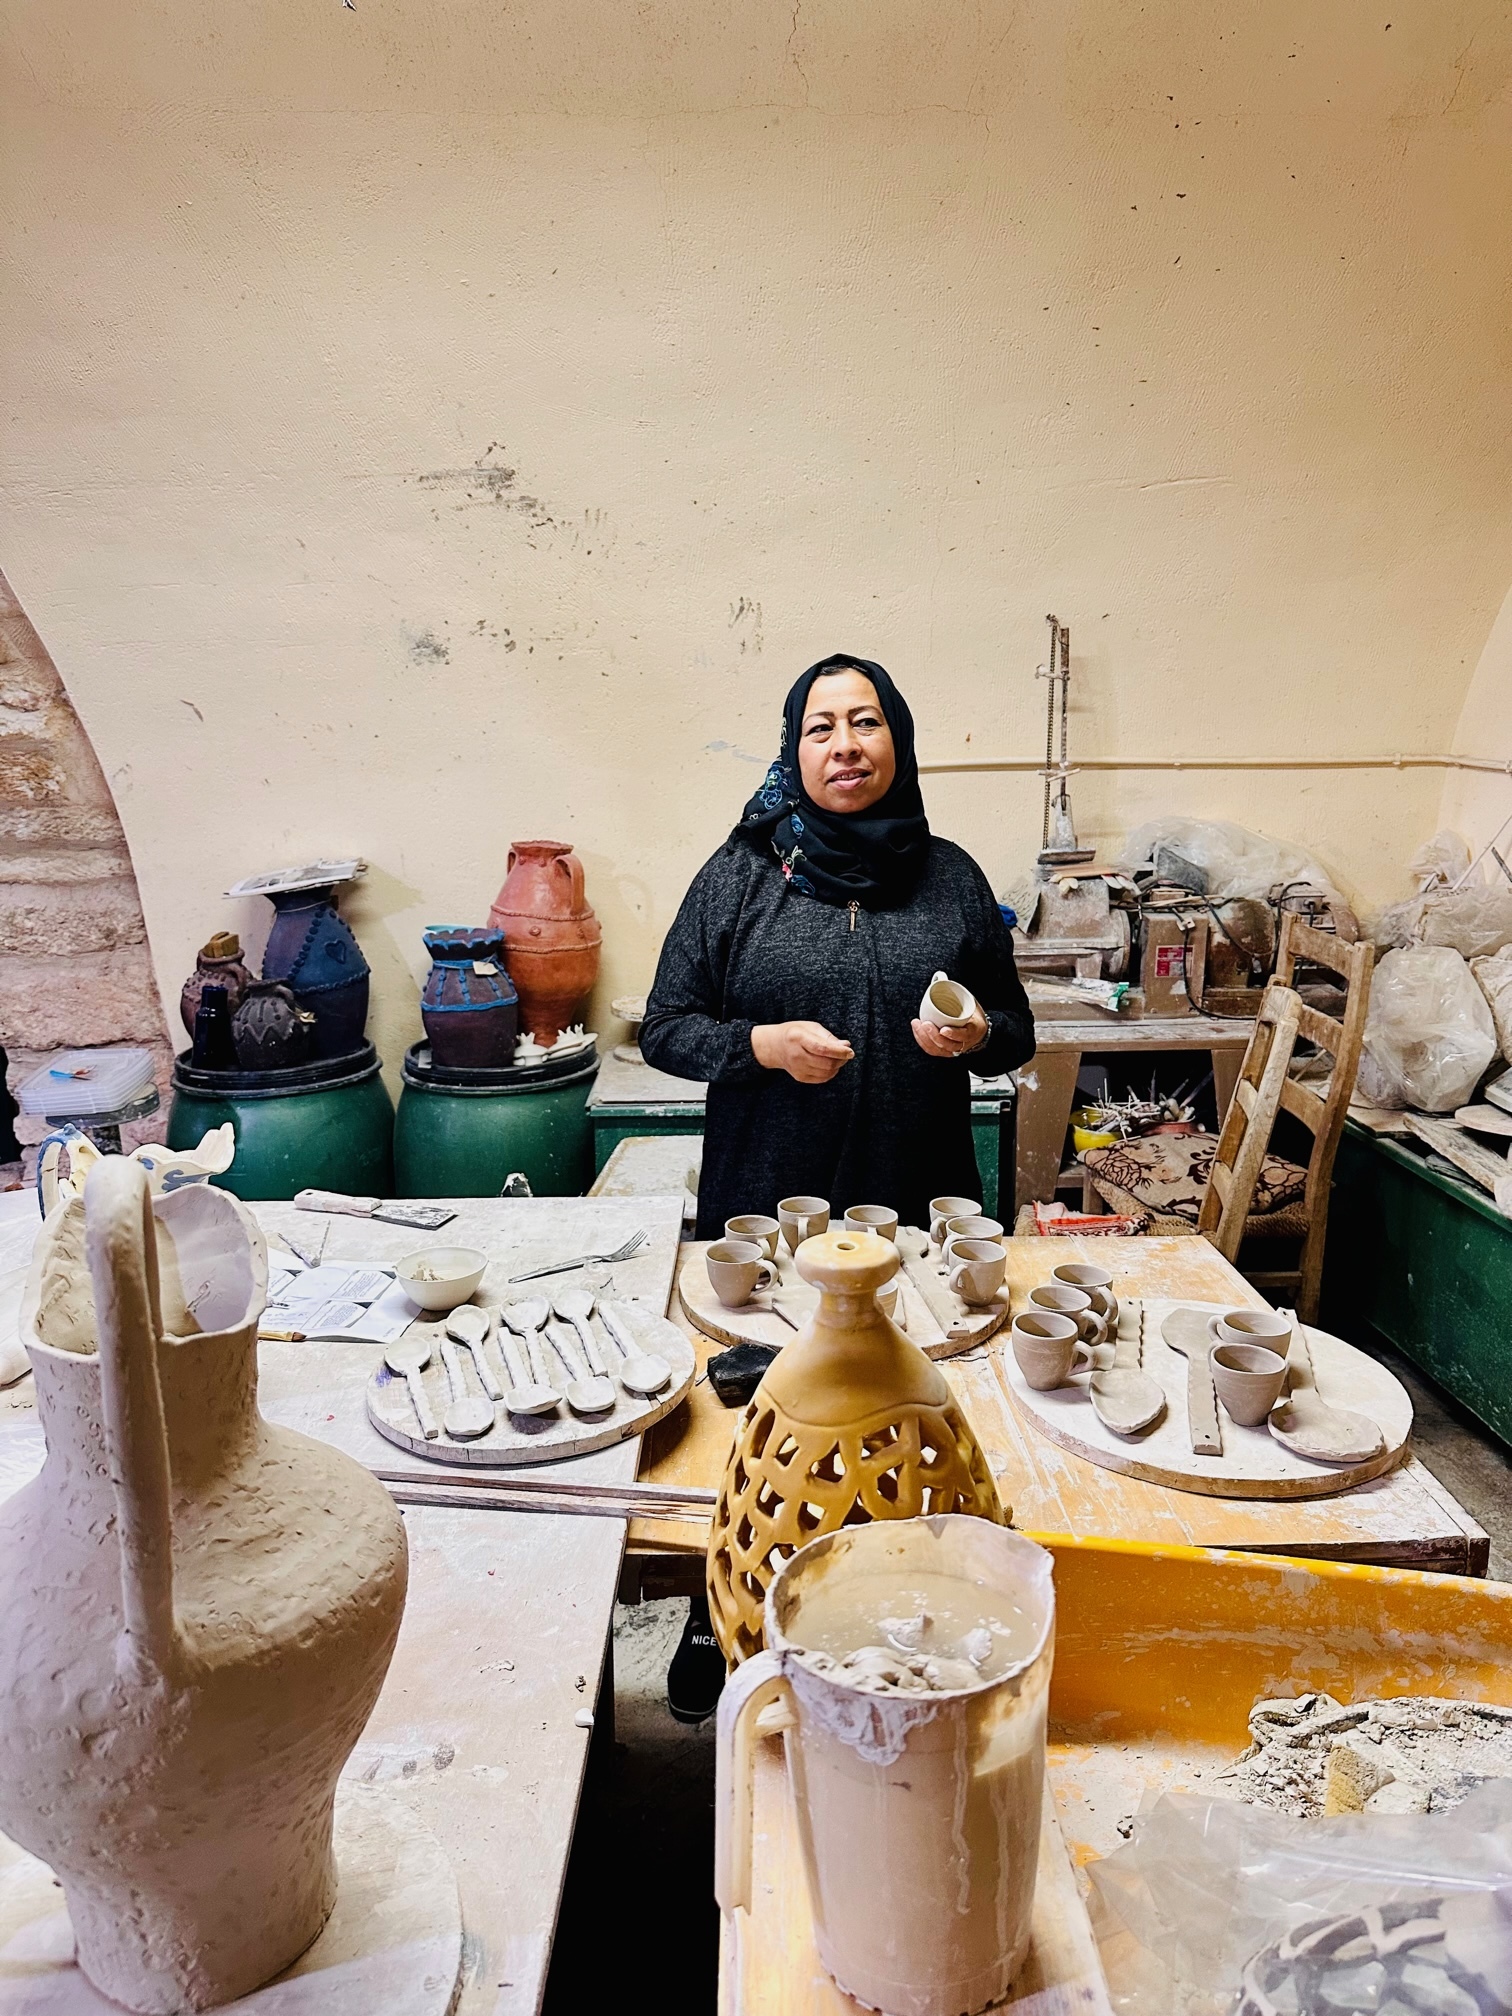 Iraq Al Mir, is a social project launched by women to recover manual trades where you can buy ceramics, artisan paper, soaps and enjoy the traditional Maqubla or Arab paella.